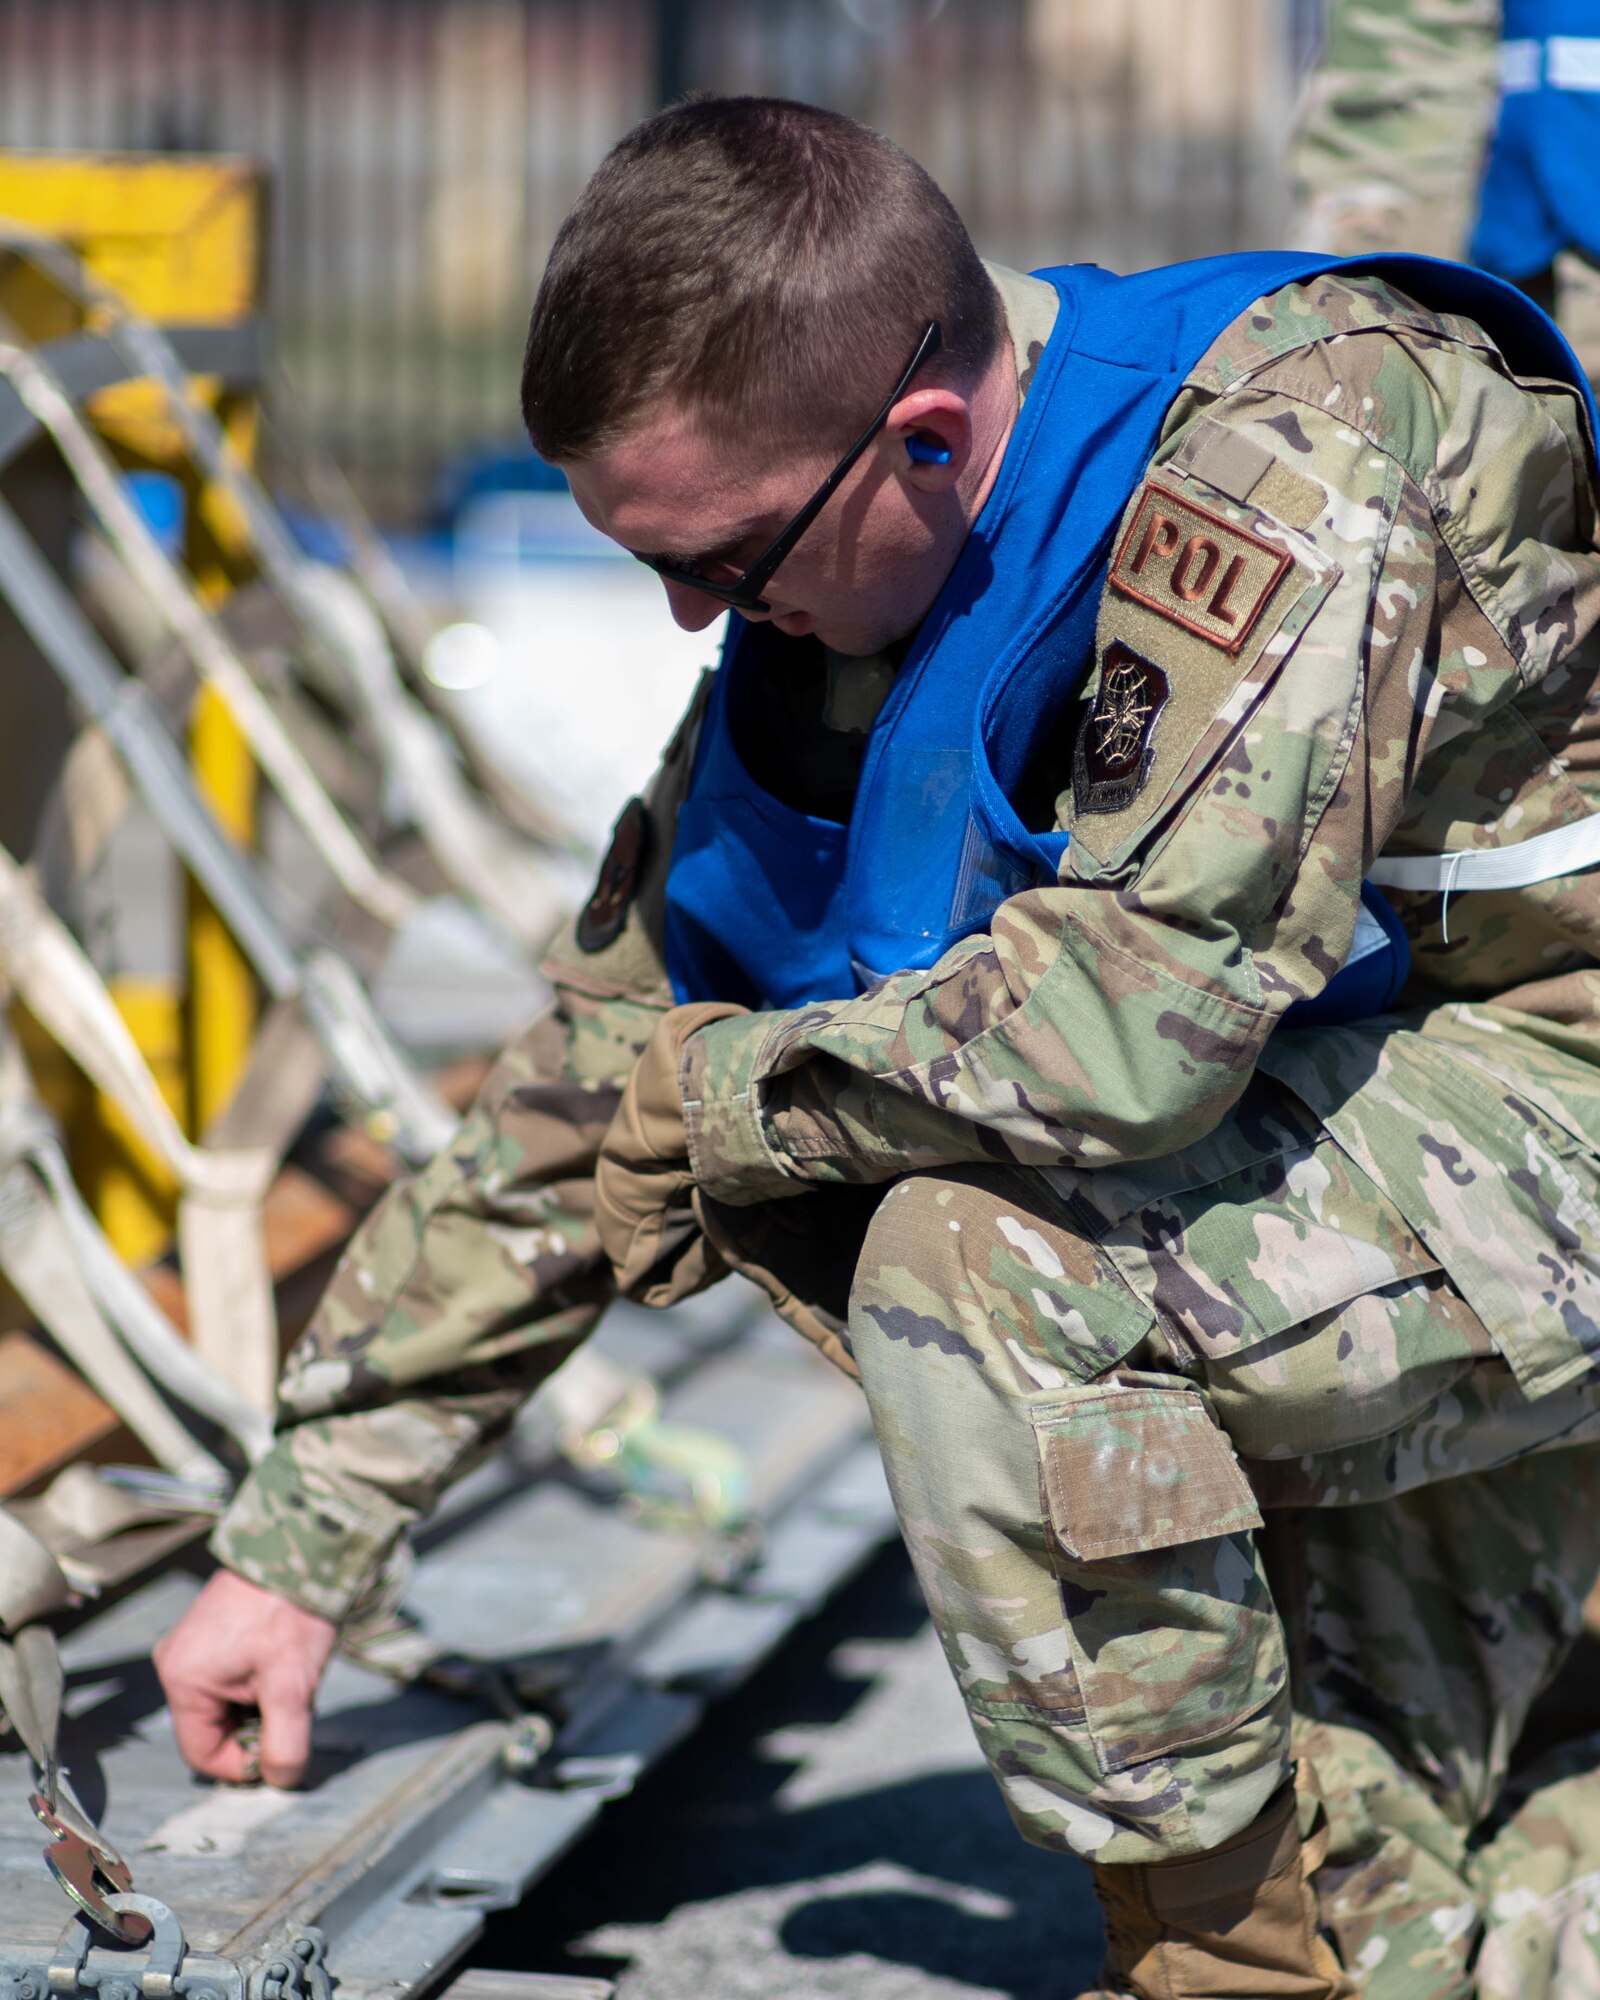 U.S. Air Force Airman 1st Class Phillip Walter, 375th Logistics Readiness Squadron fuels controller, inspects a pallet during a mobility deployment rehearsal, on Scott Air Force Base, Illinois, March 16, 2022. This deployment mobility rehearsal emphasizes readiness of command and control procedures and continuity of operations in a simulated contested environment. (U.S. Air Force photo by Airman 1st Class Violette Hosack)